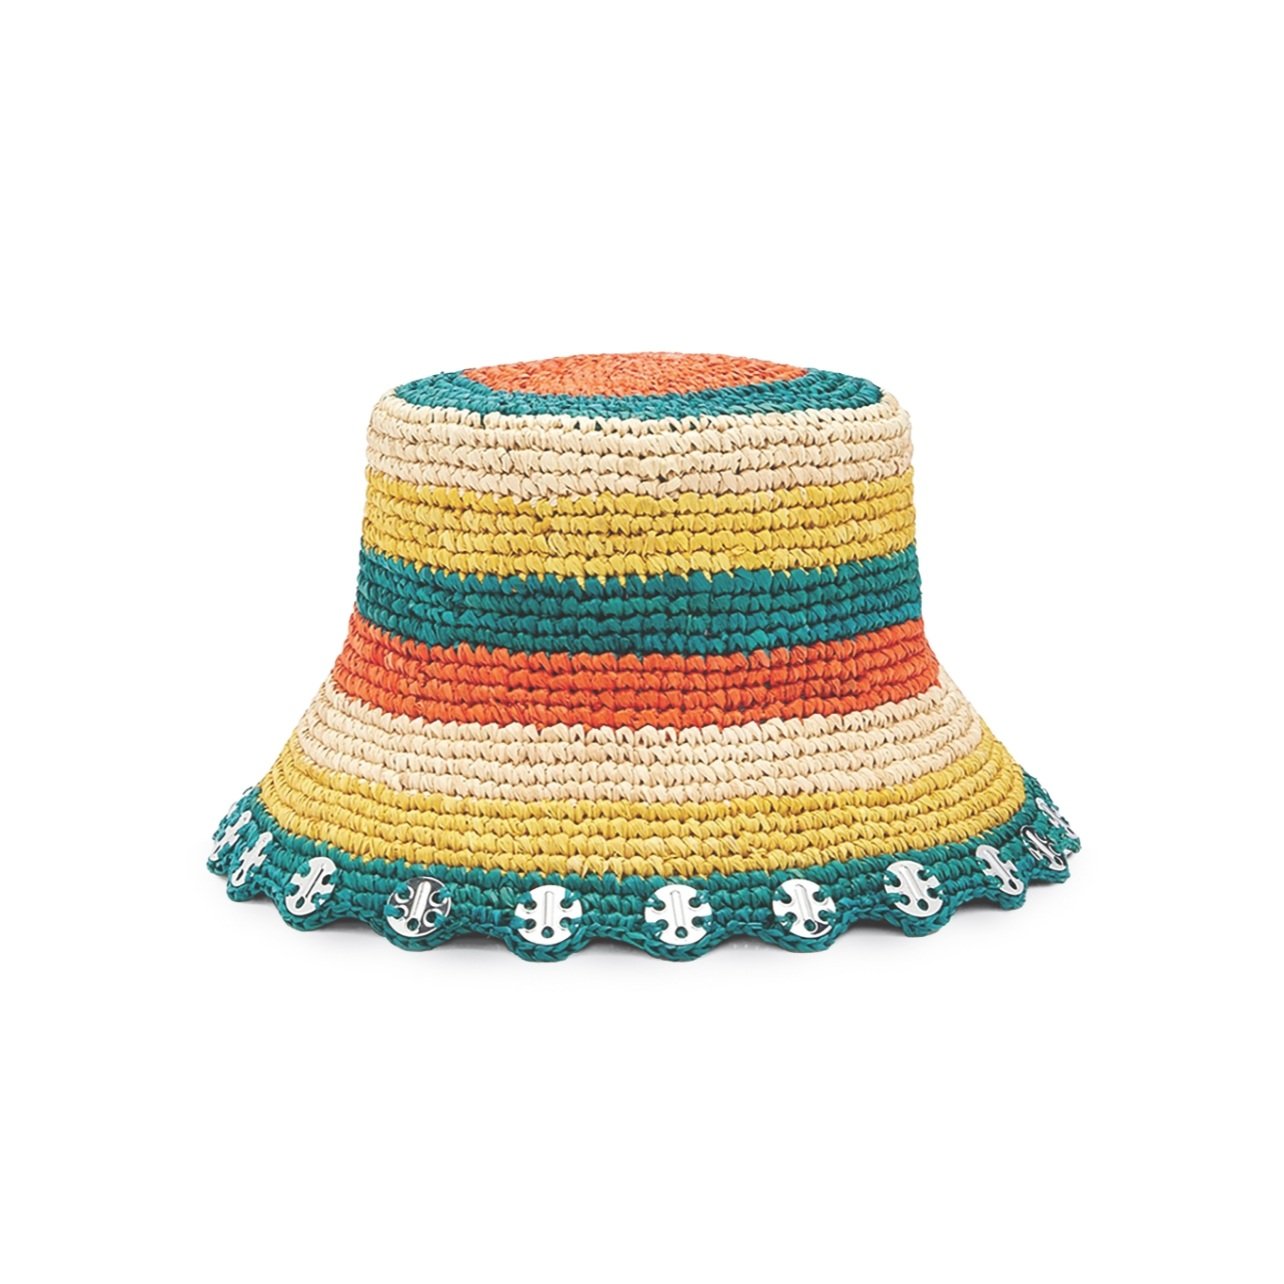 Multicolor raffia bucket hat from The Webster